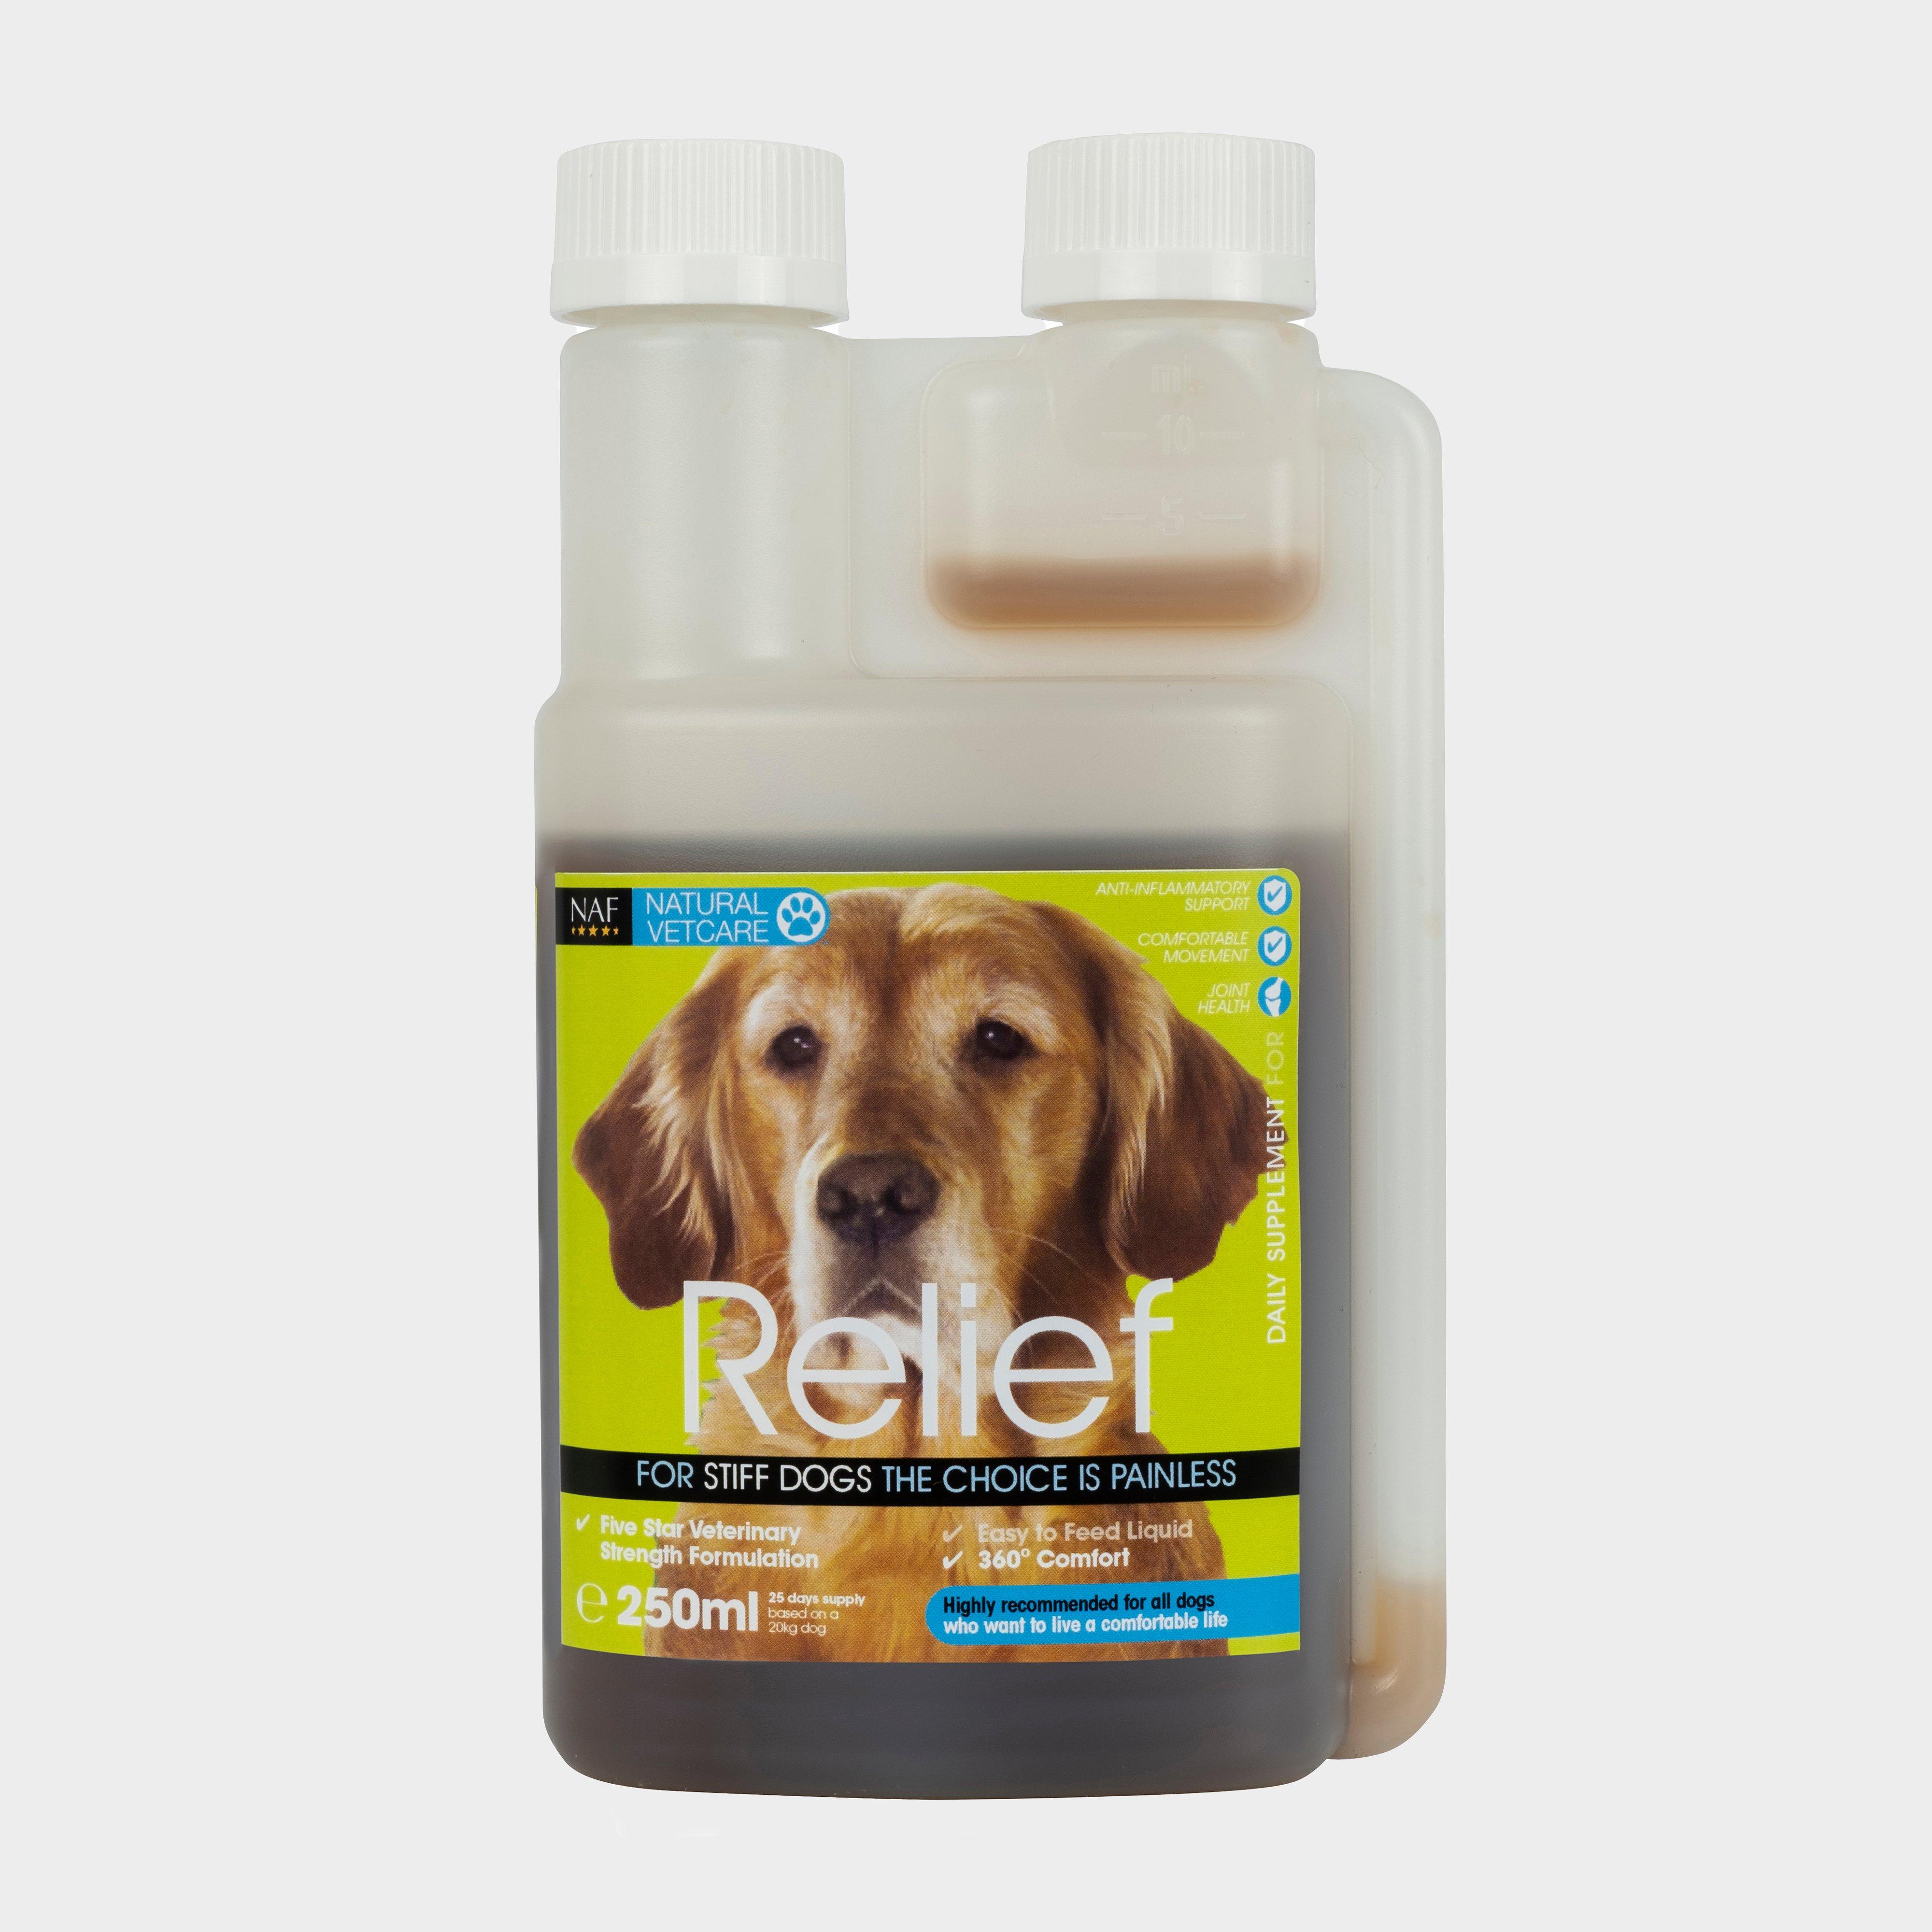 Naf Nvc Dog Relief - Clear/clear  Clear/clear